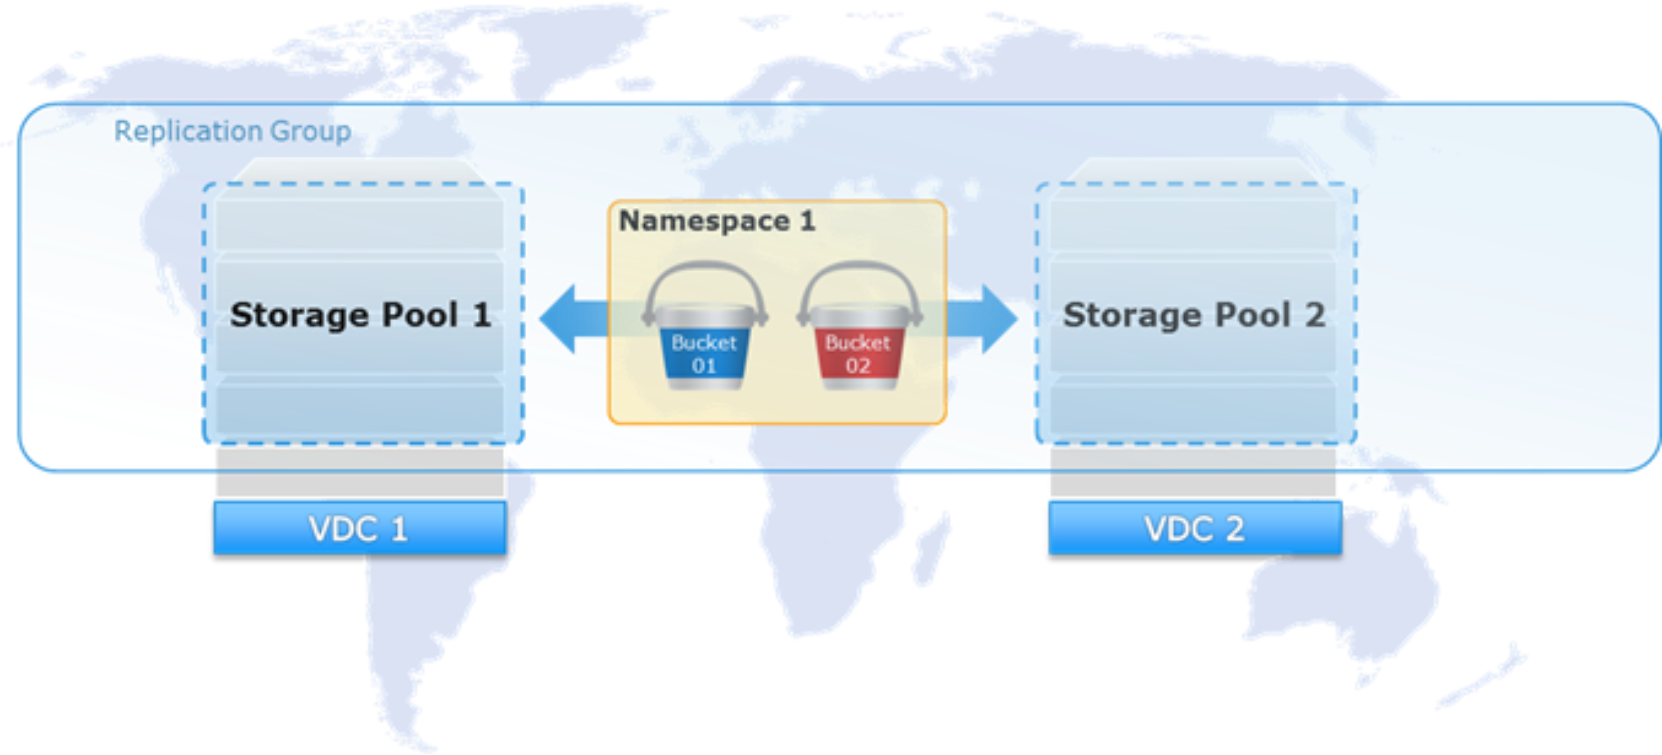 This is an example of the ECS components, including vdc, storage pool, and namespace.